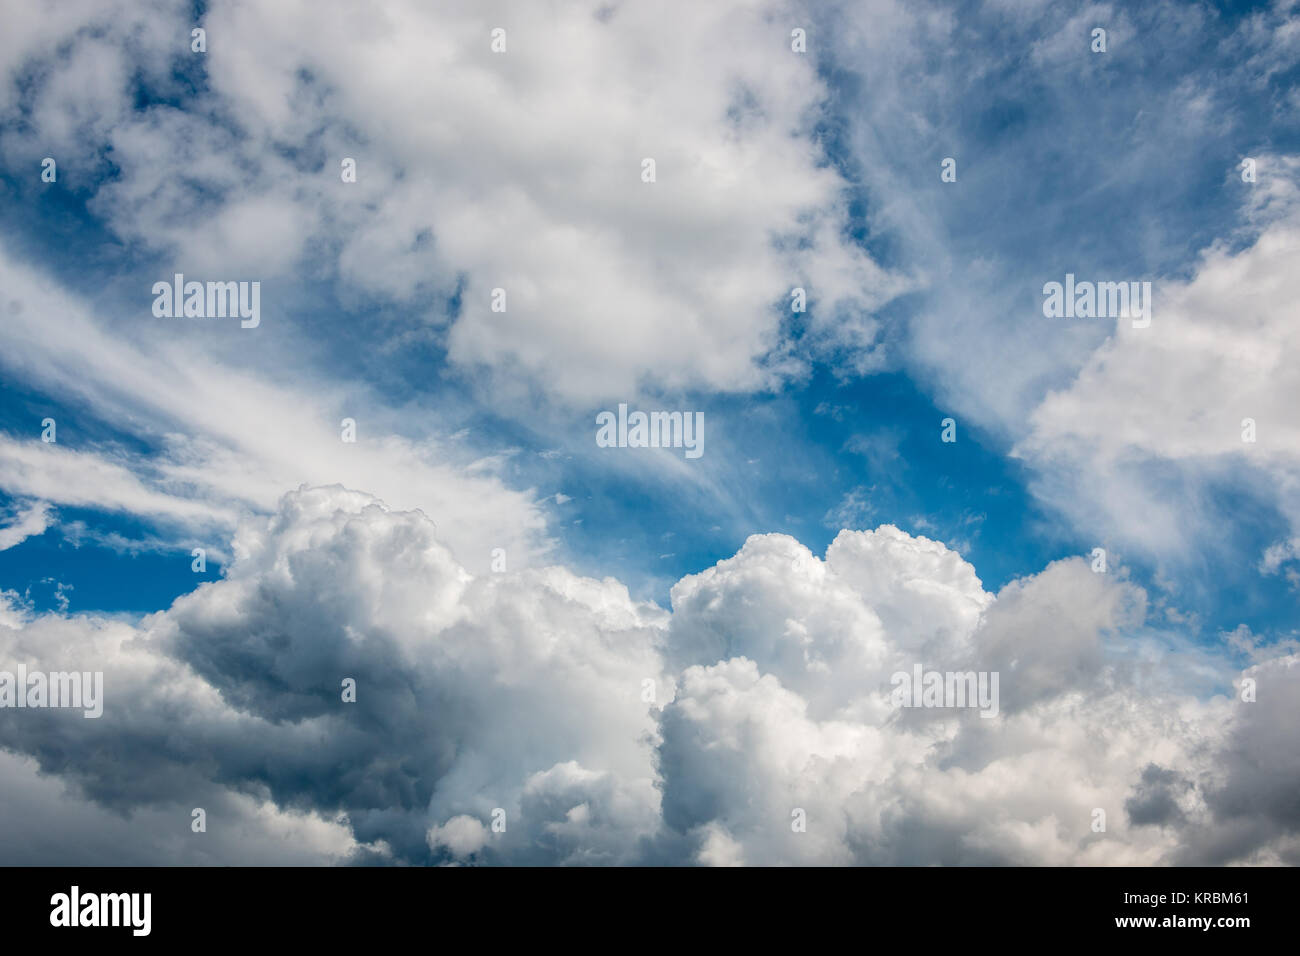 Dramatic deep blue sky and white clouds Stock Photo